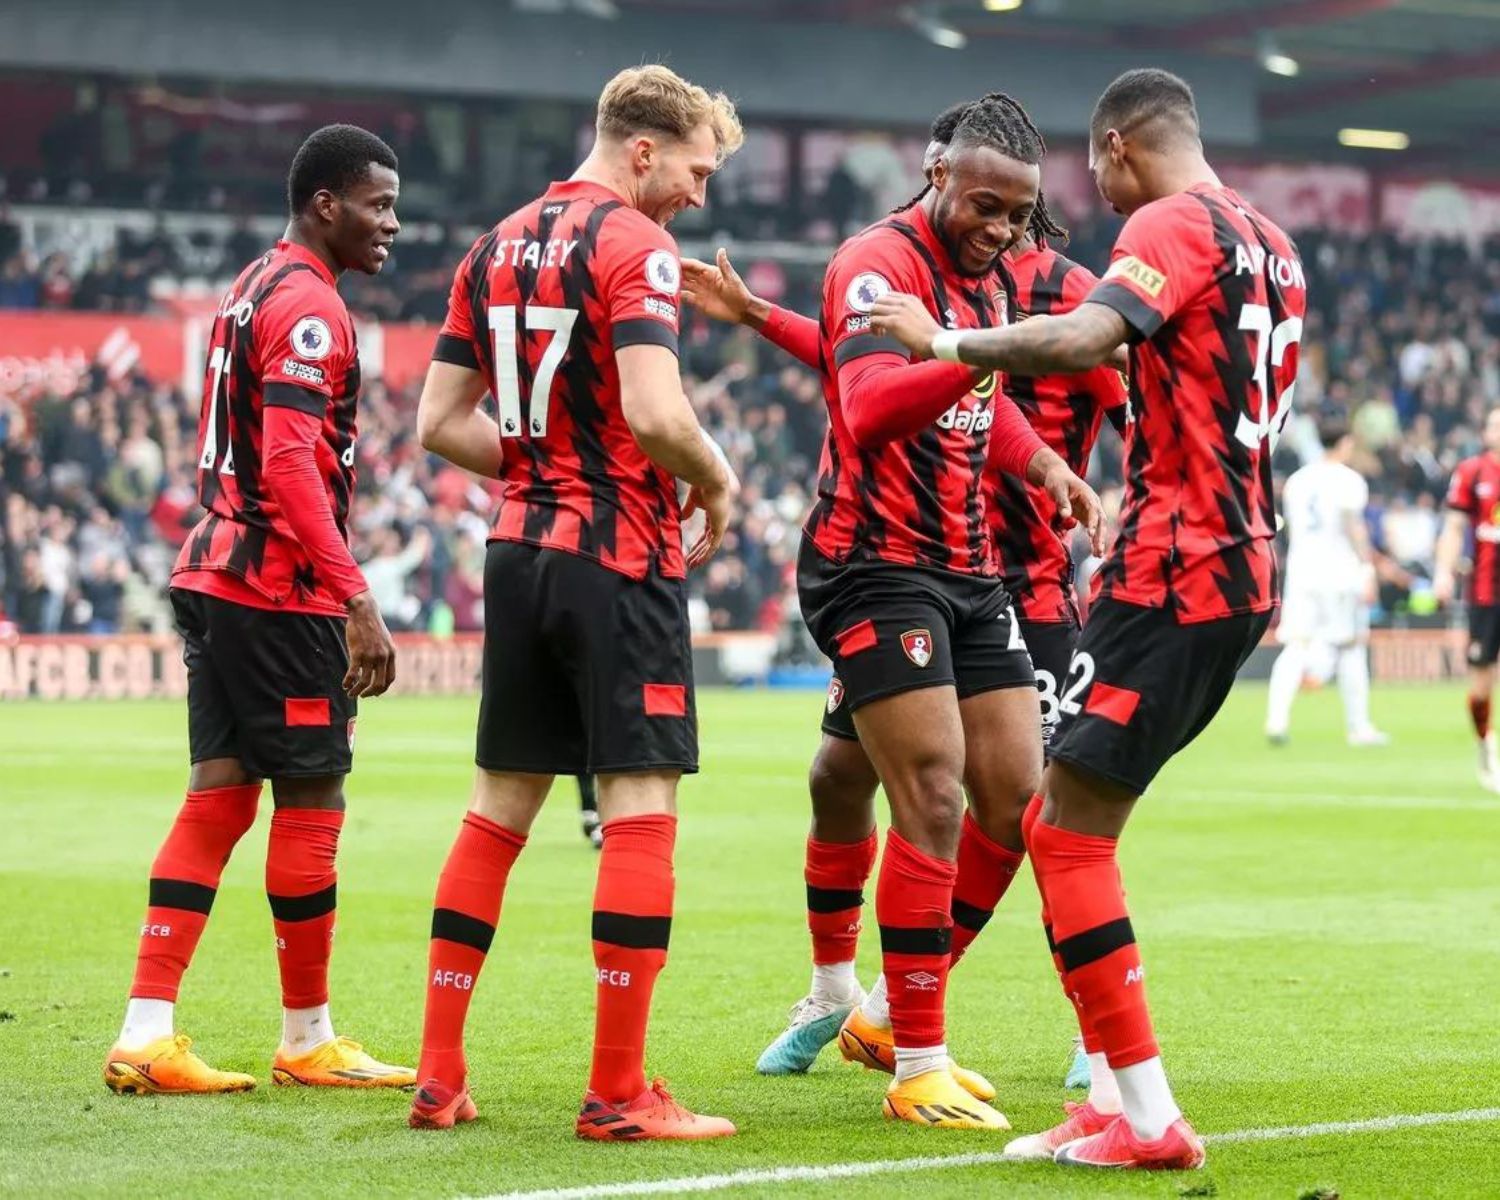 bournemouth-fc-22-football-club-facts